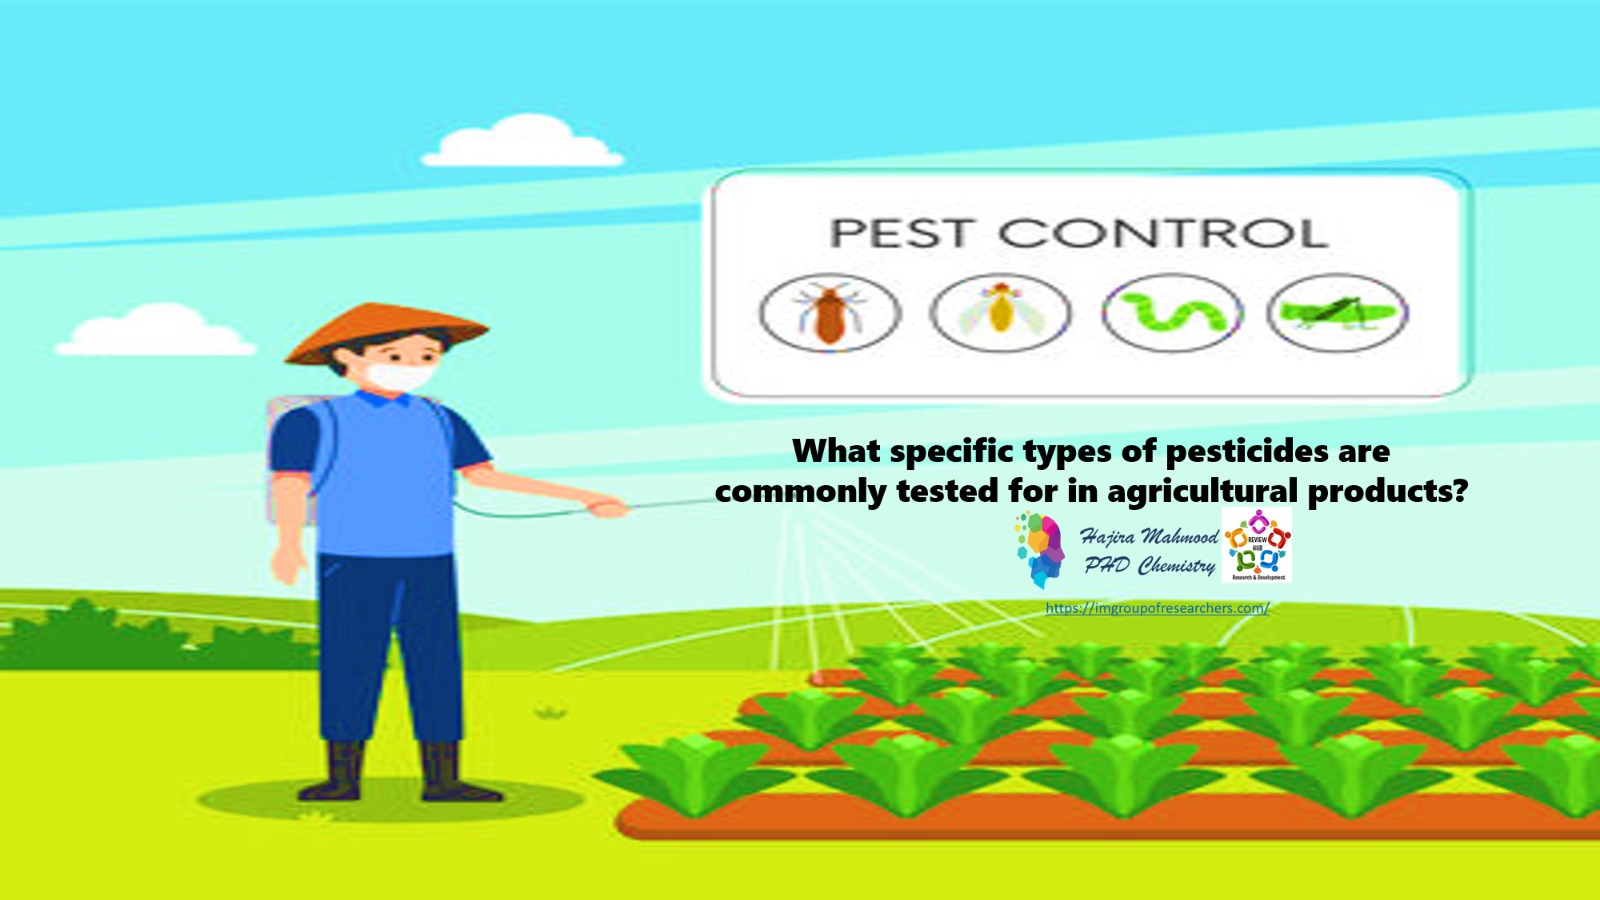 What specific types of pesticides are commonly tested for in agricultural products?